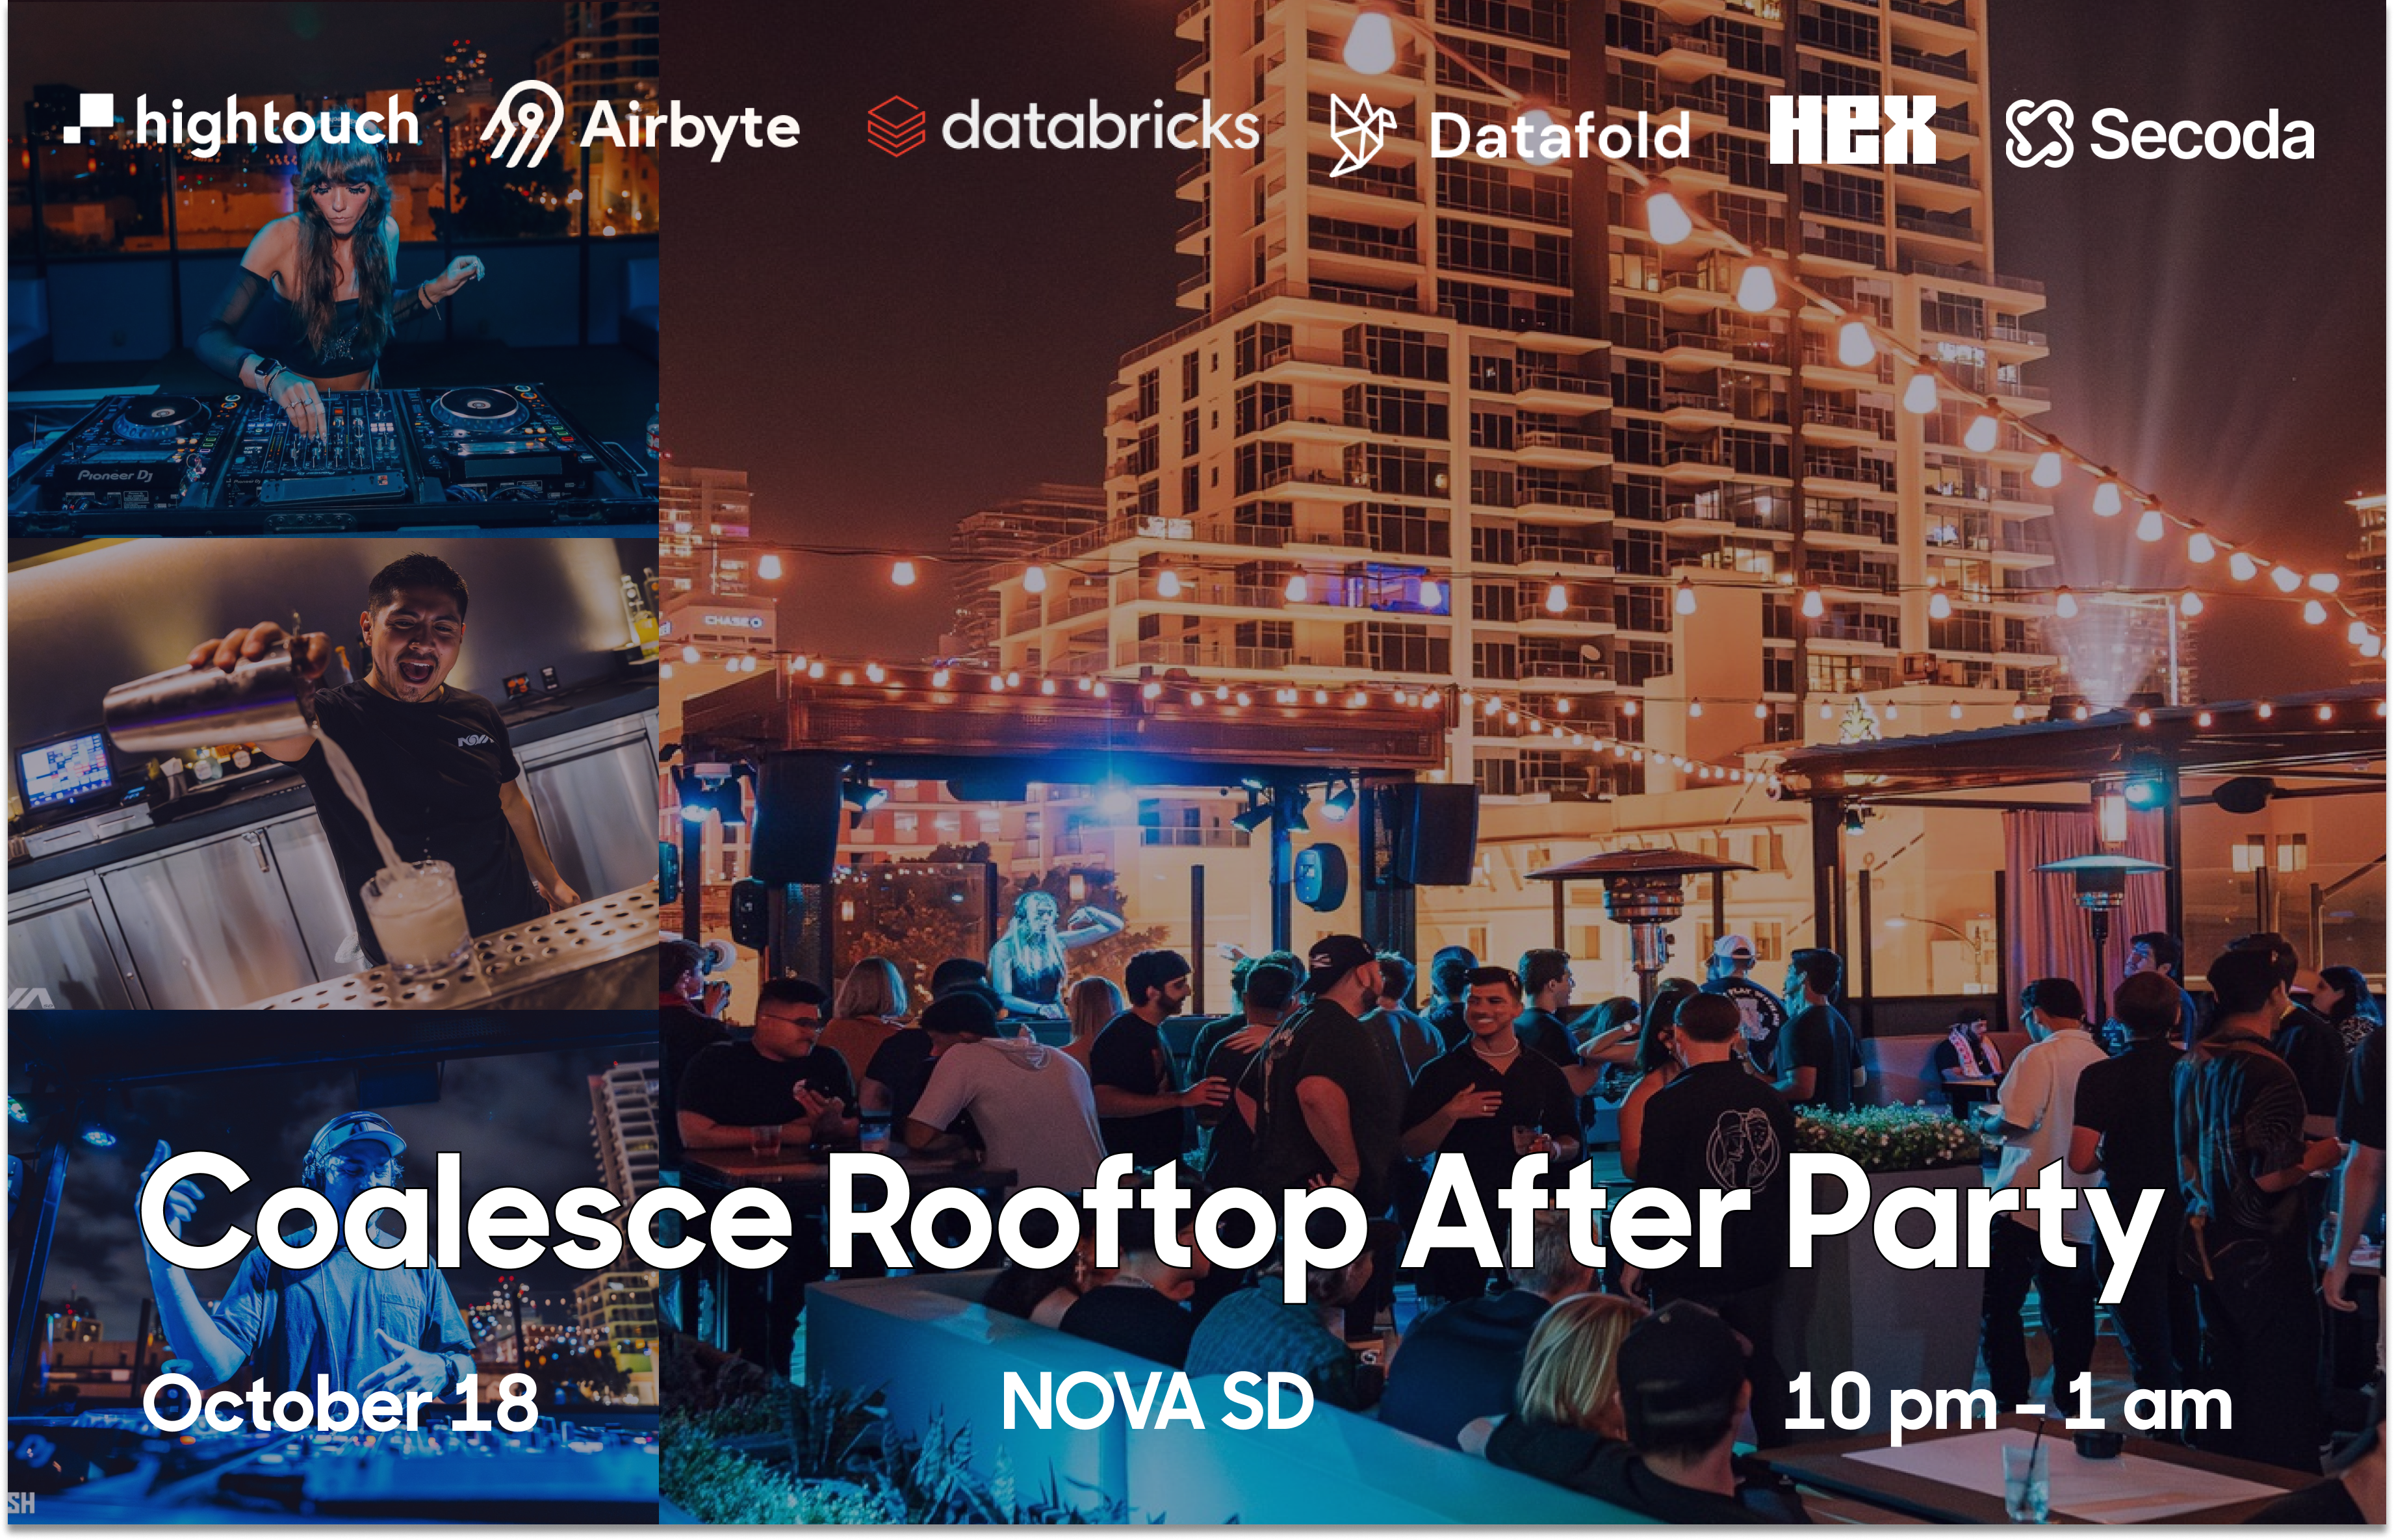 Coalesce Rooftop After Party